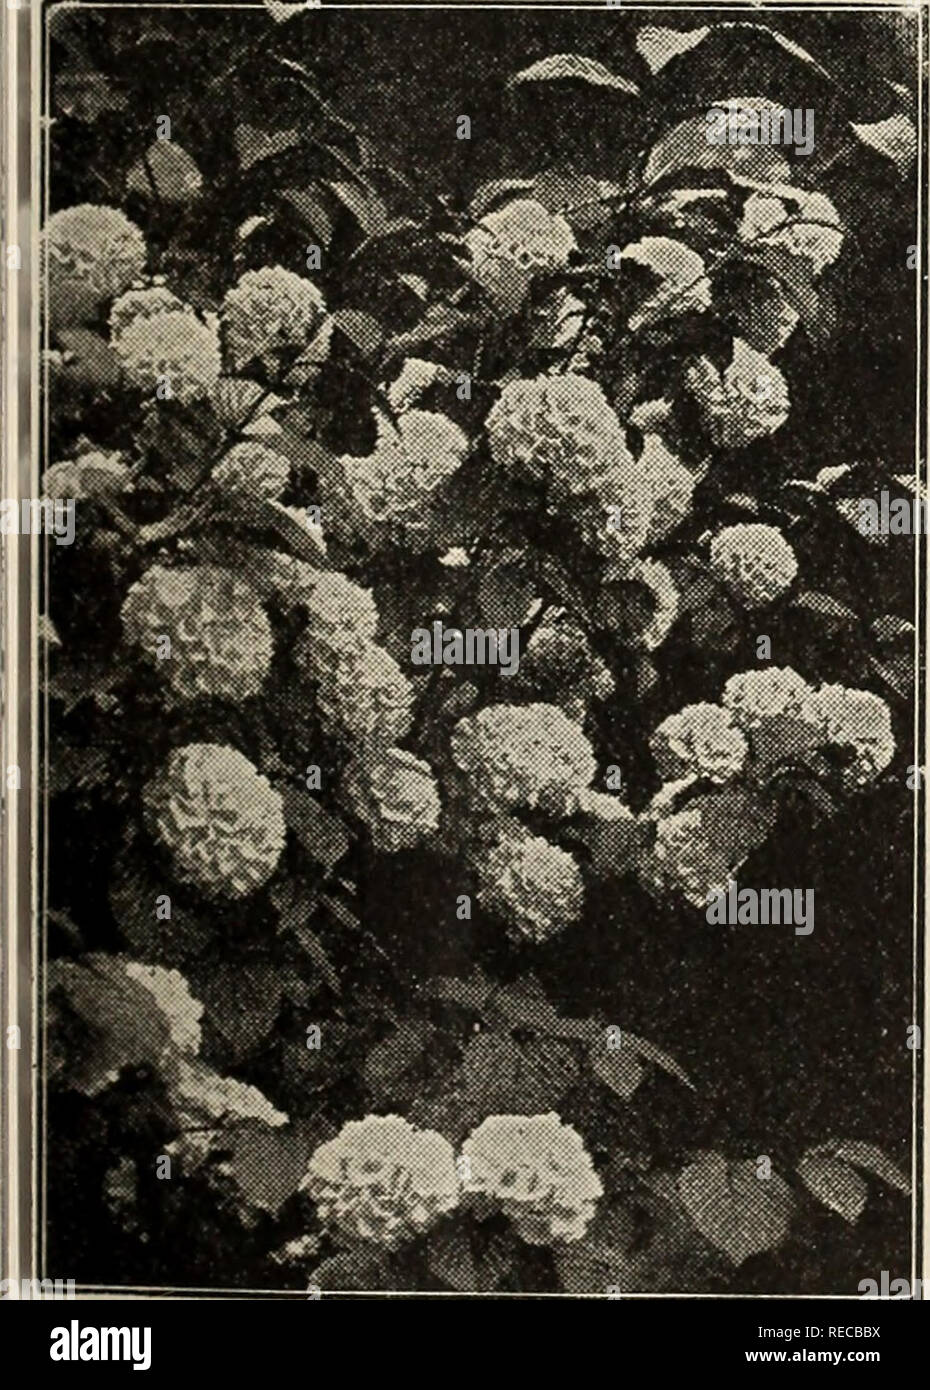 . The Conard &amp; Jones Co. roses. Rose culture; Roses; Fruit Seeds Catalogs; Plants, Ornamental Seeds Catalogs. Symphoricarpos racemosus (Snowberry). Viburnum plicatum (Japan Snowball) The Choicest Spireas spiraea Vanhouttei. Grows 5 to 6 feet high, or even more than this in favorable locations, and blooms in May and June, It is one of the most beautiful of all; immense bloomer, pure snow-white flowers borne in elegant, plume-shaped clusters. Makes a most beautiful, graceful hedge. Red Spirea, Anthony Waterer, Perpetual-blooming. A fine, hardy shrub, particularly desirable for the dooryard a Stock Photo